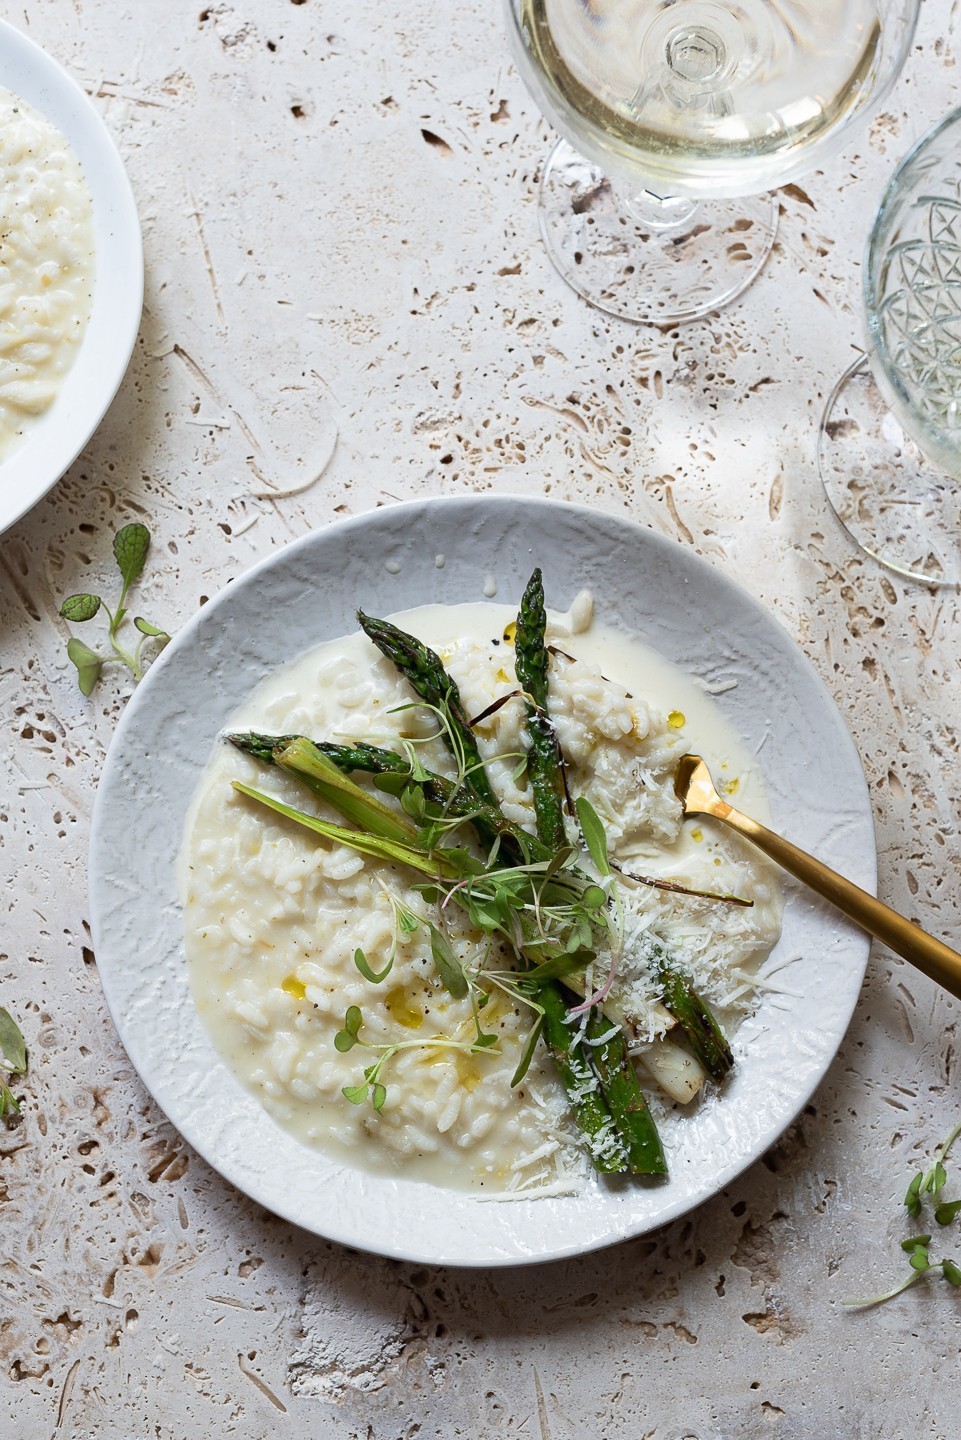 Charred leek and asparagus risotto